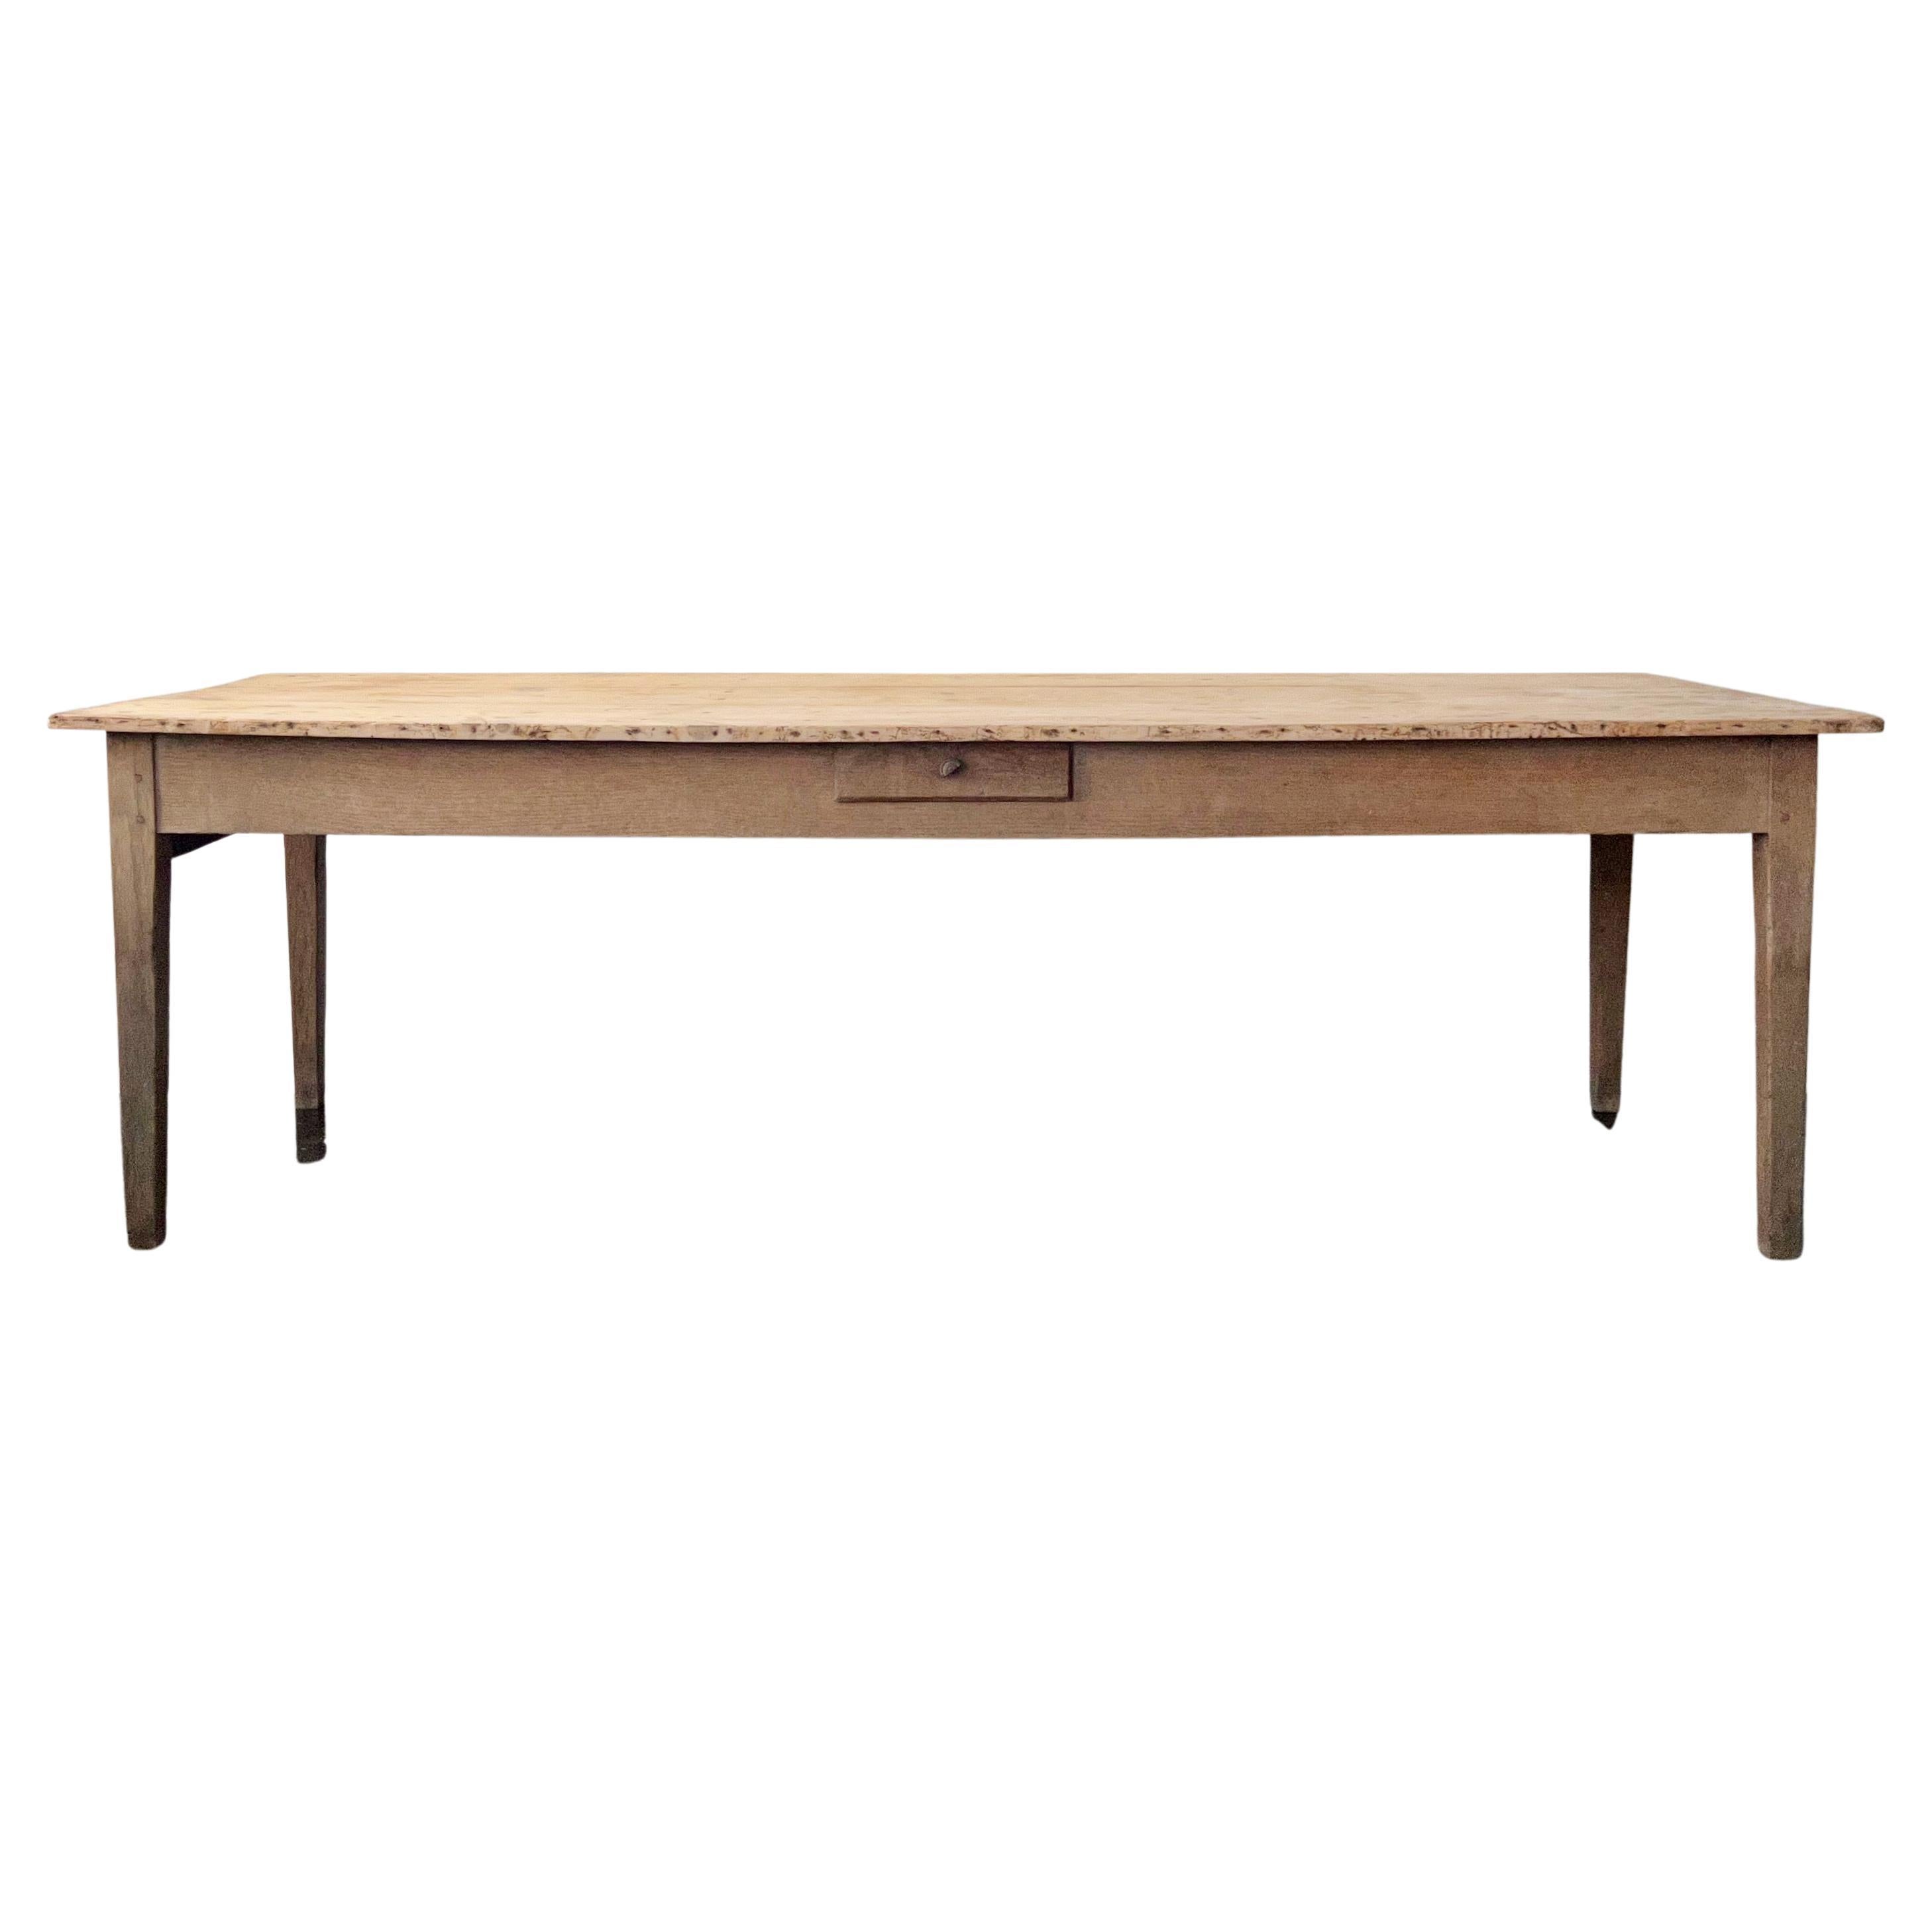 19th century French Super Long Table For Sale